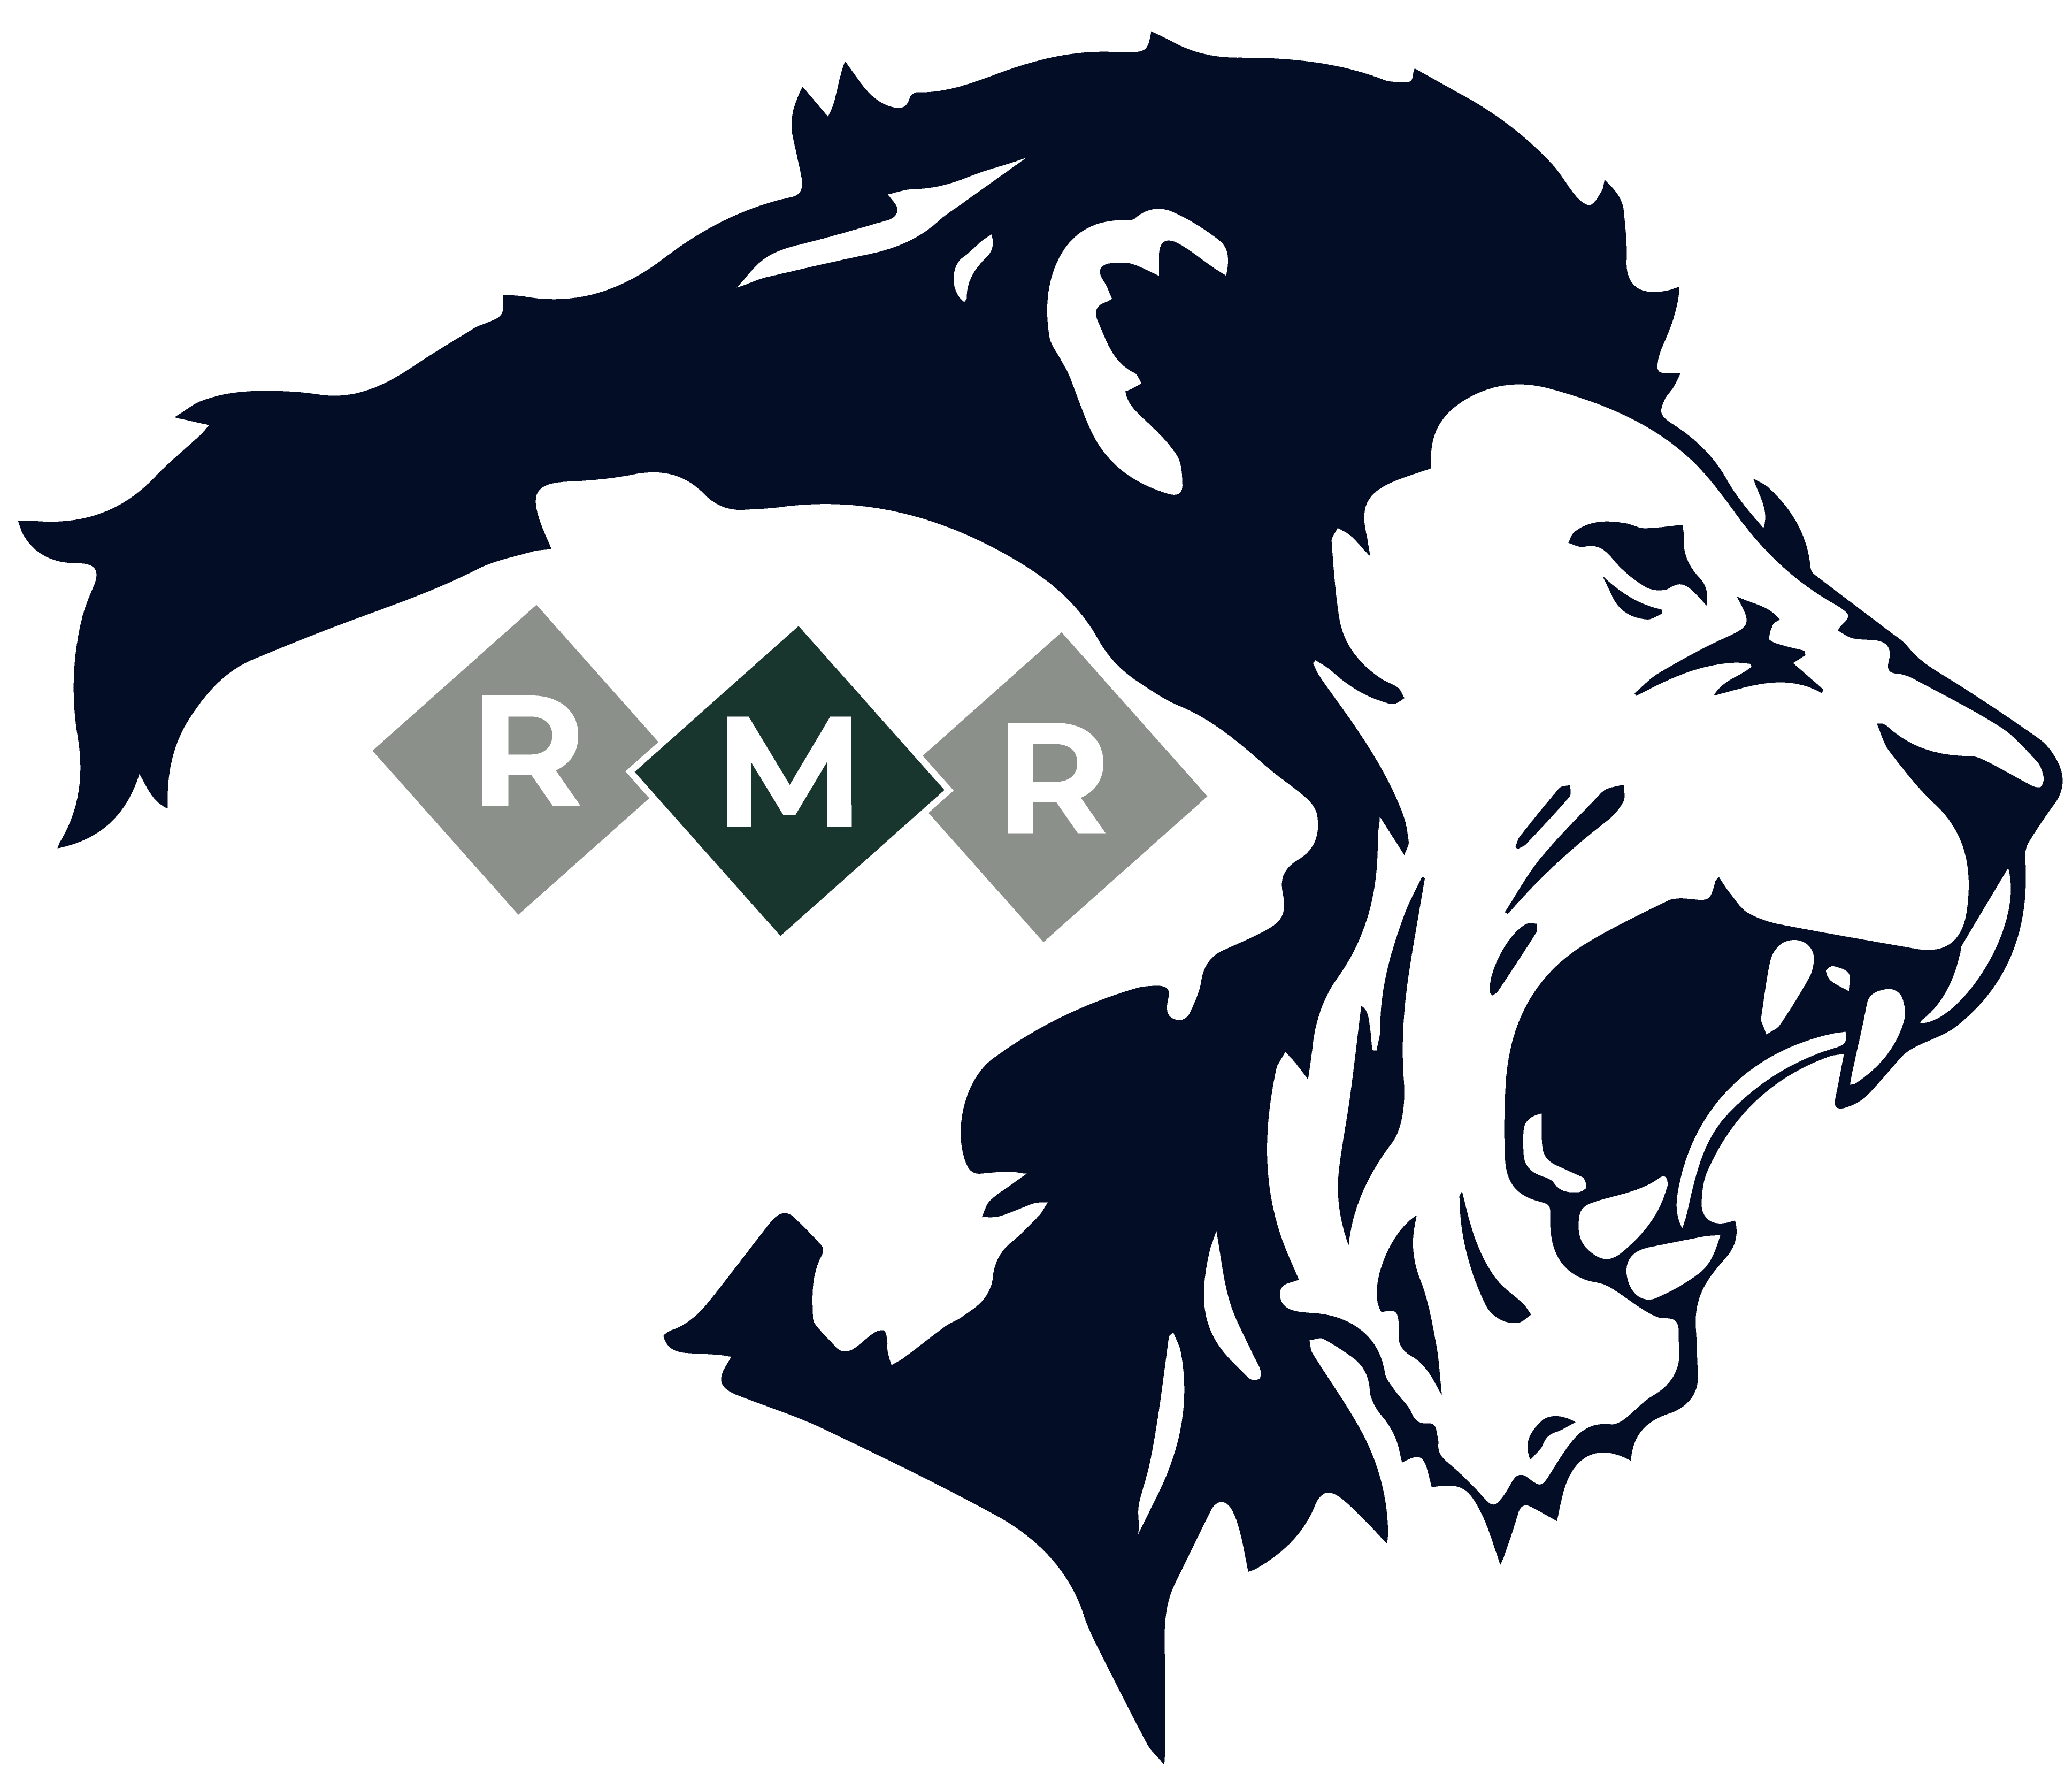 Logo for RM Recruitment: A sleek and modern design featuring the initials "RMR" in bold, black letters on a white background.